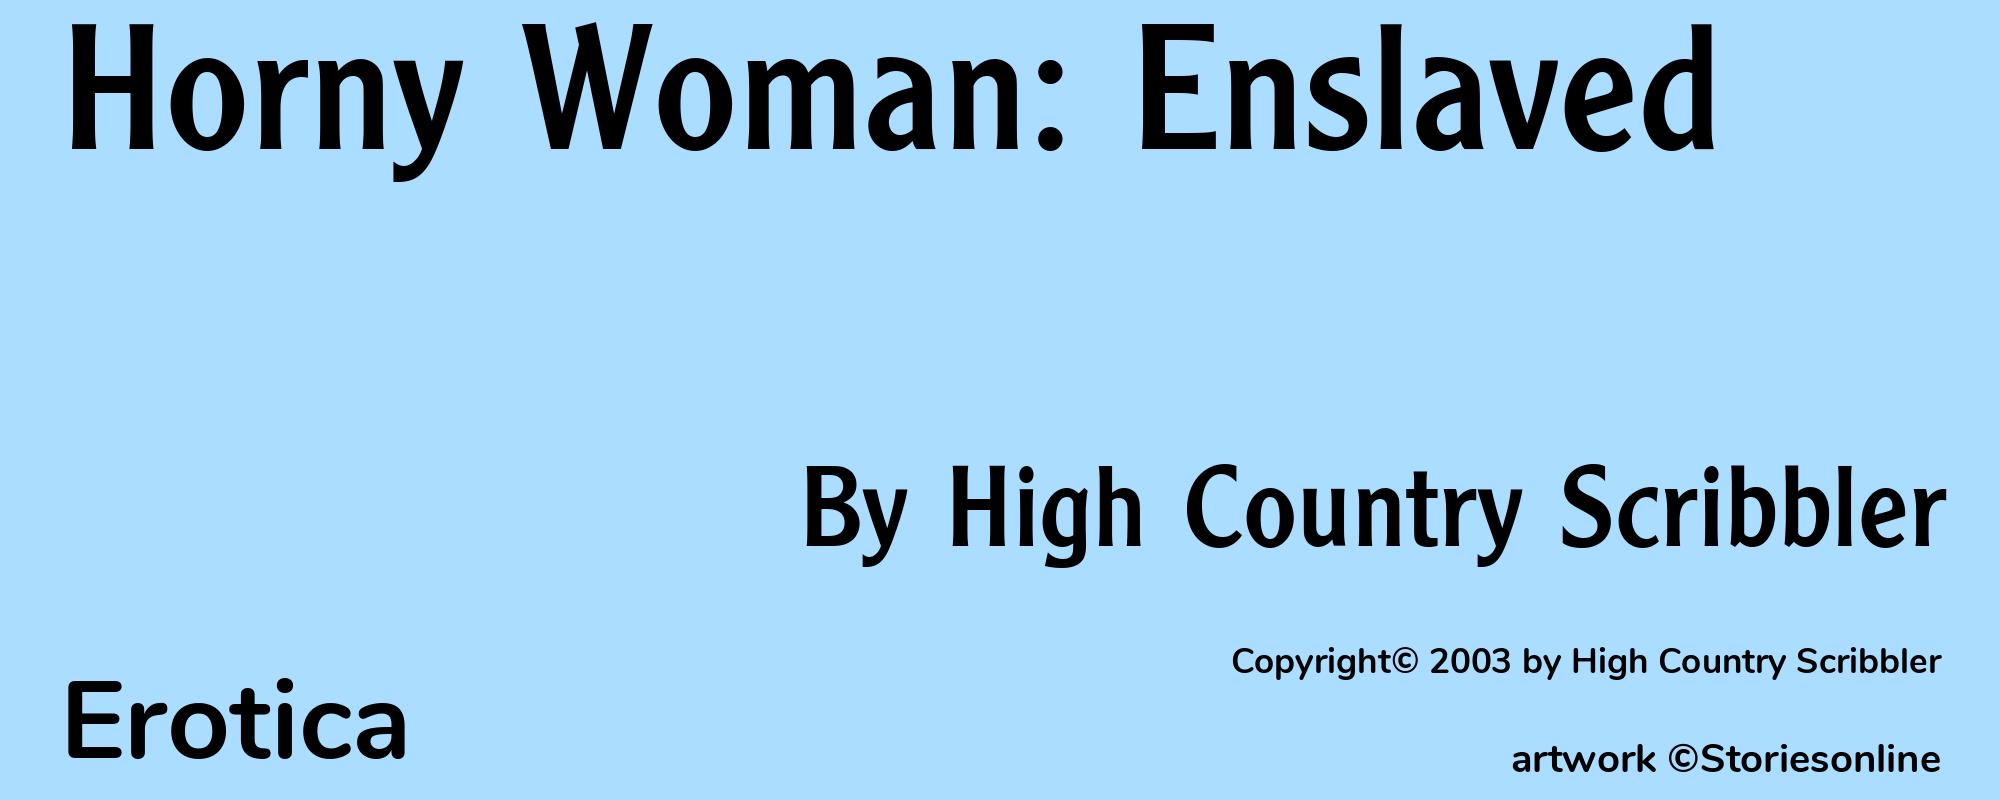 Horny Woman: Enslaved - Cover